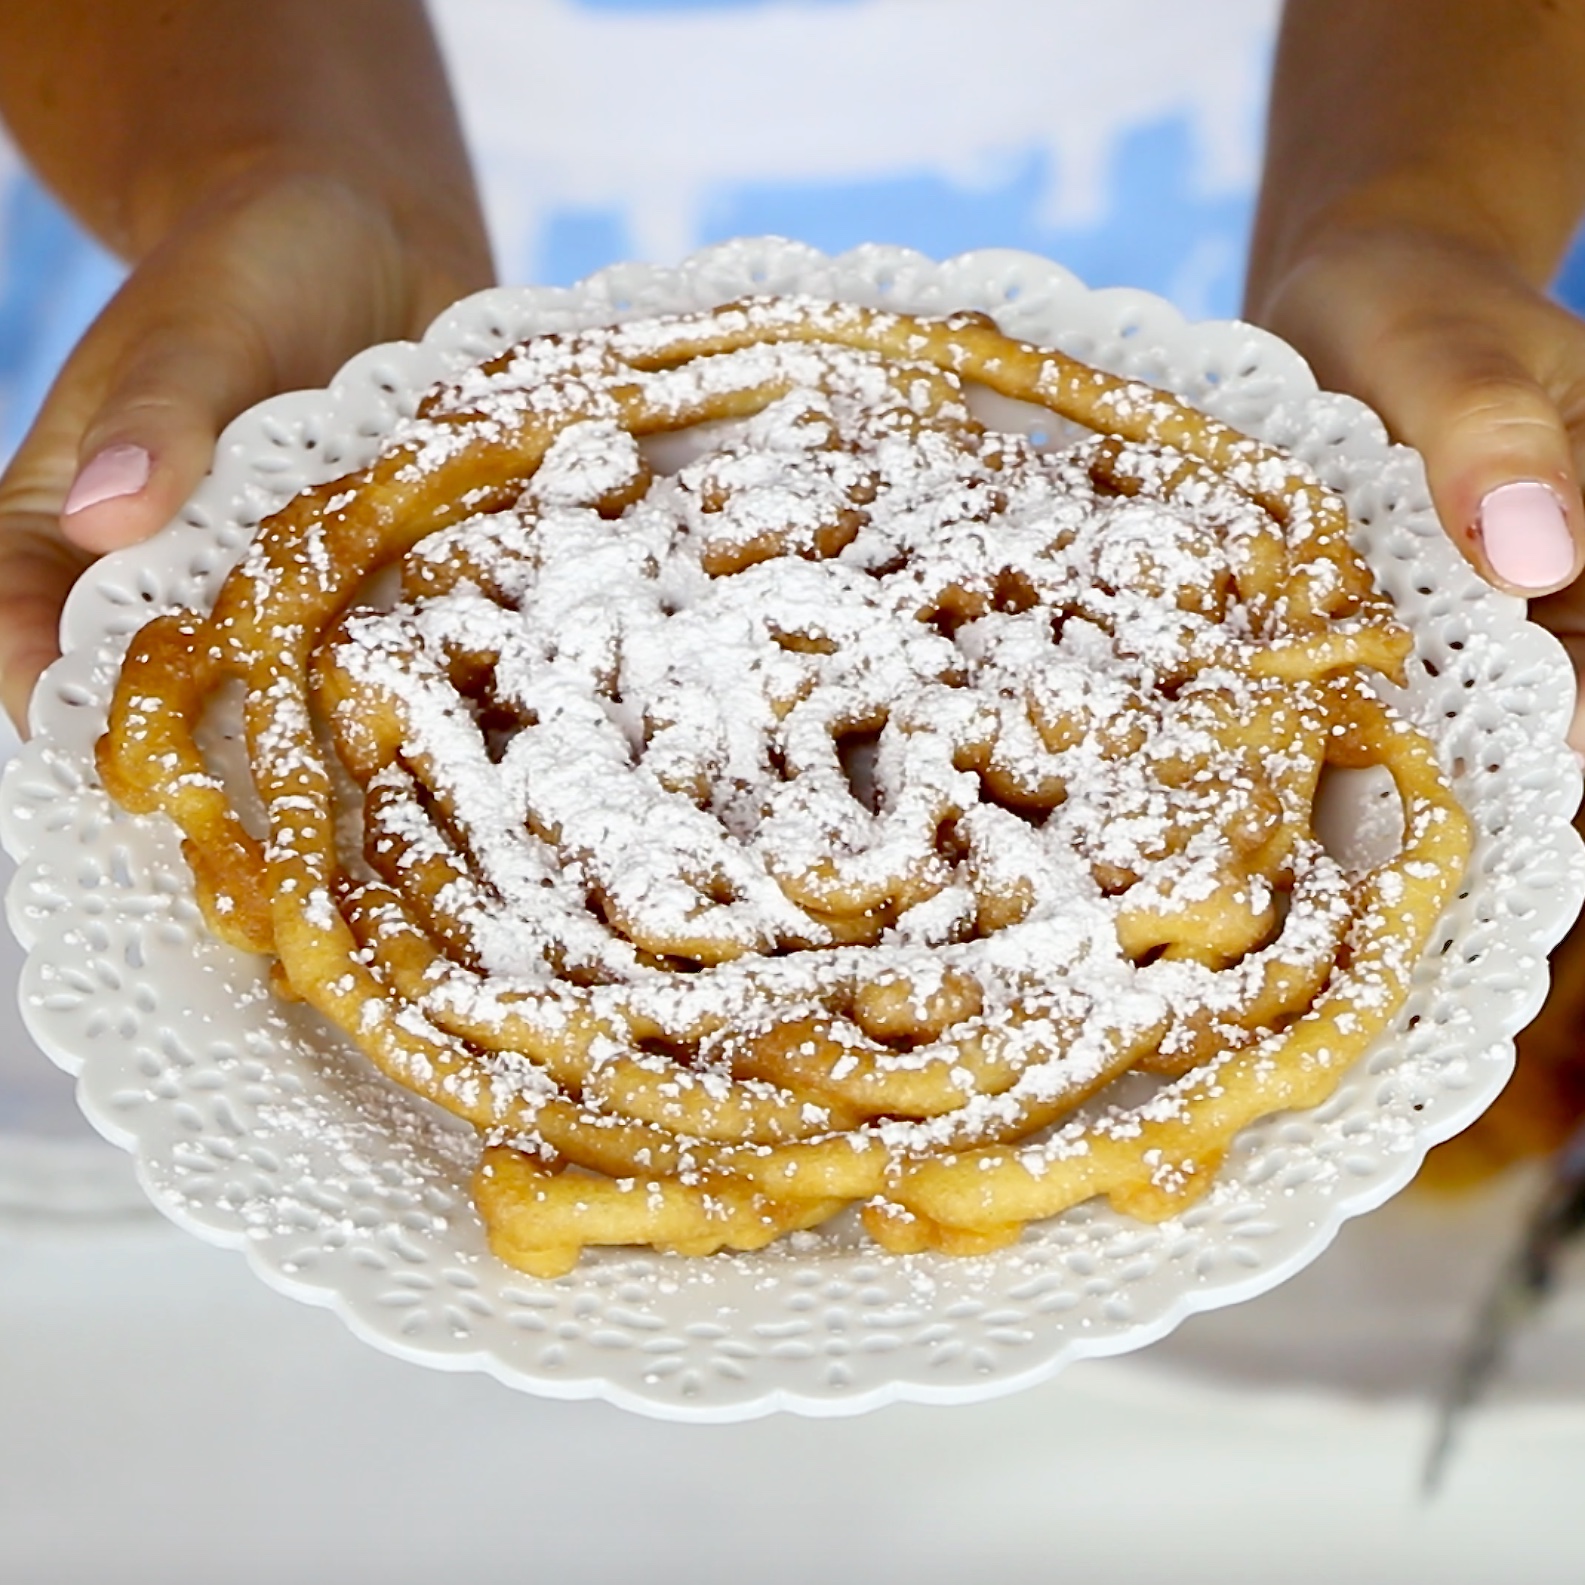 {VIDEO} Easy Pancake Mix Funnel Cakes